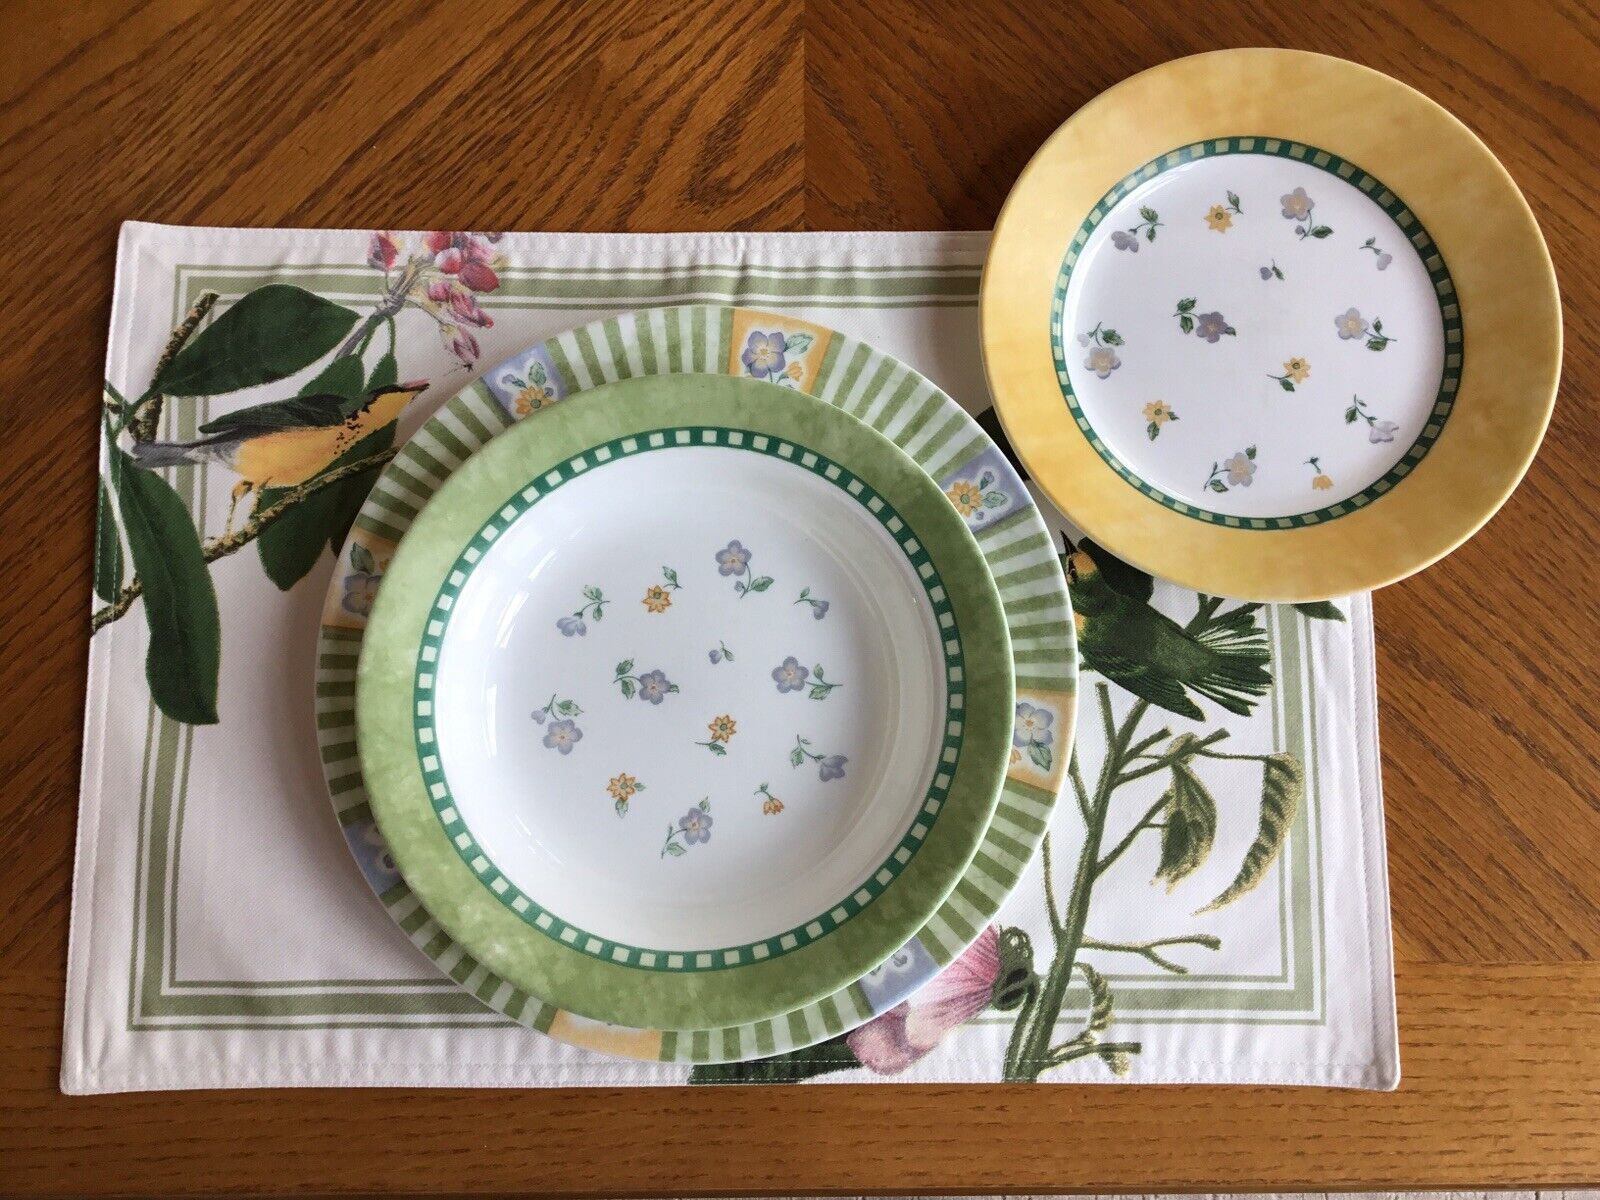 Corelle Dishes “Classical Garden” 3 Piece Place Setting by Corning Vintage